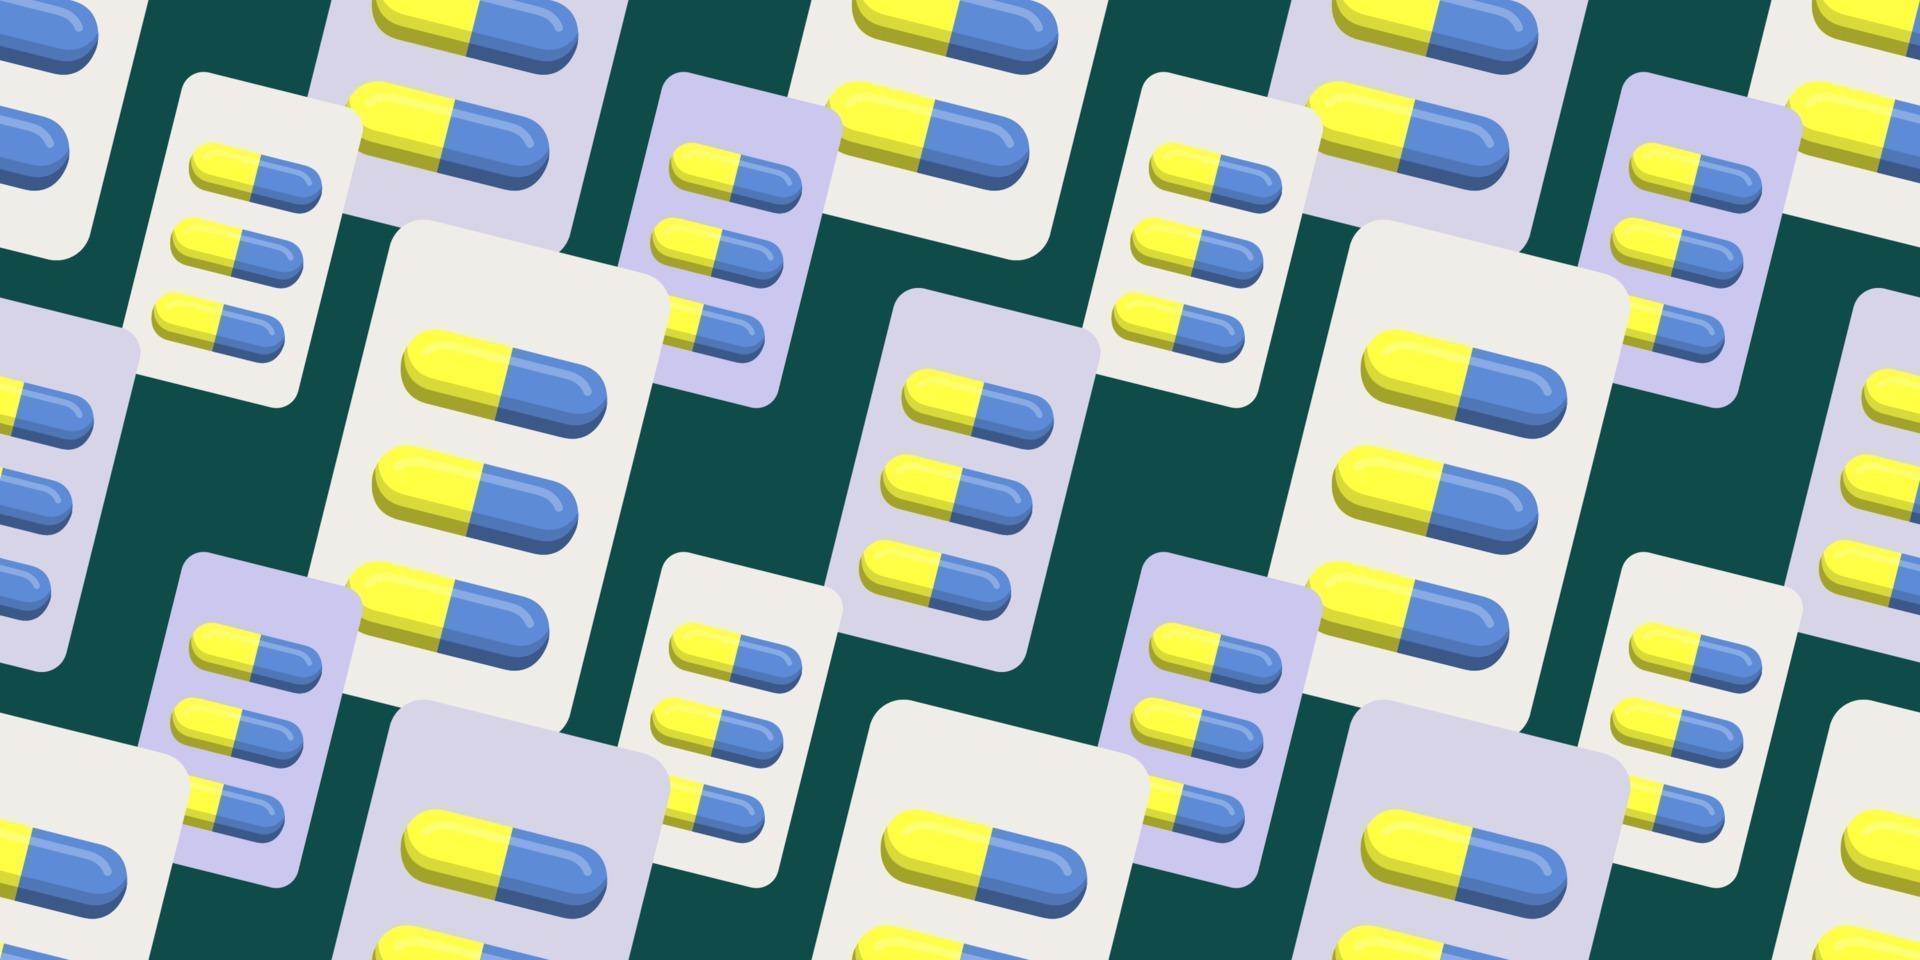 Seamless vector pattern of yellow and blue pills in blister packaging, pill blister pack isolated on dark background. Medicine creative concepts. illustration for pharmaceutical industry.